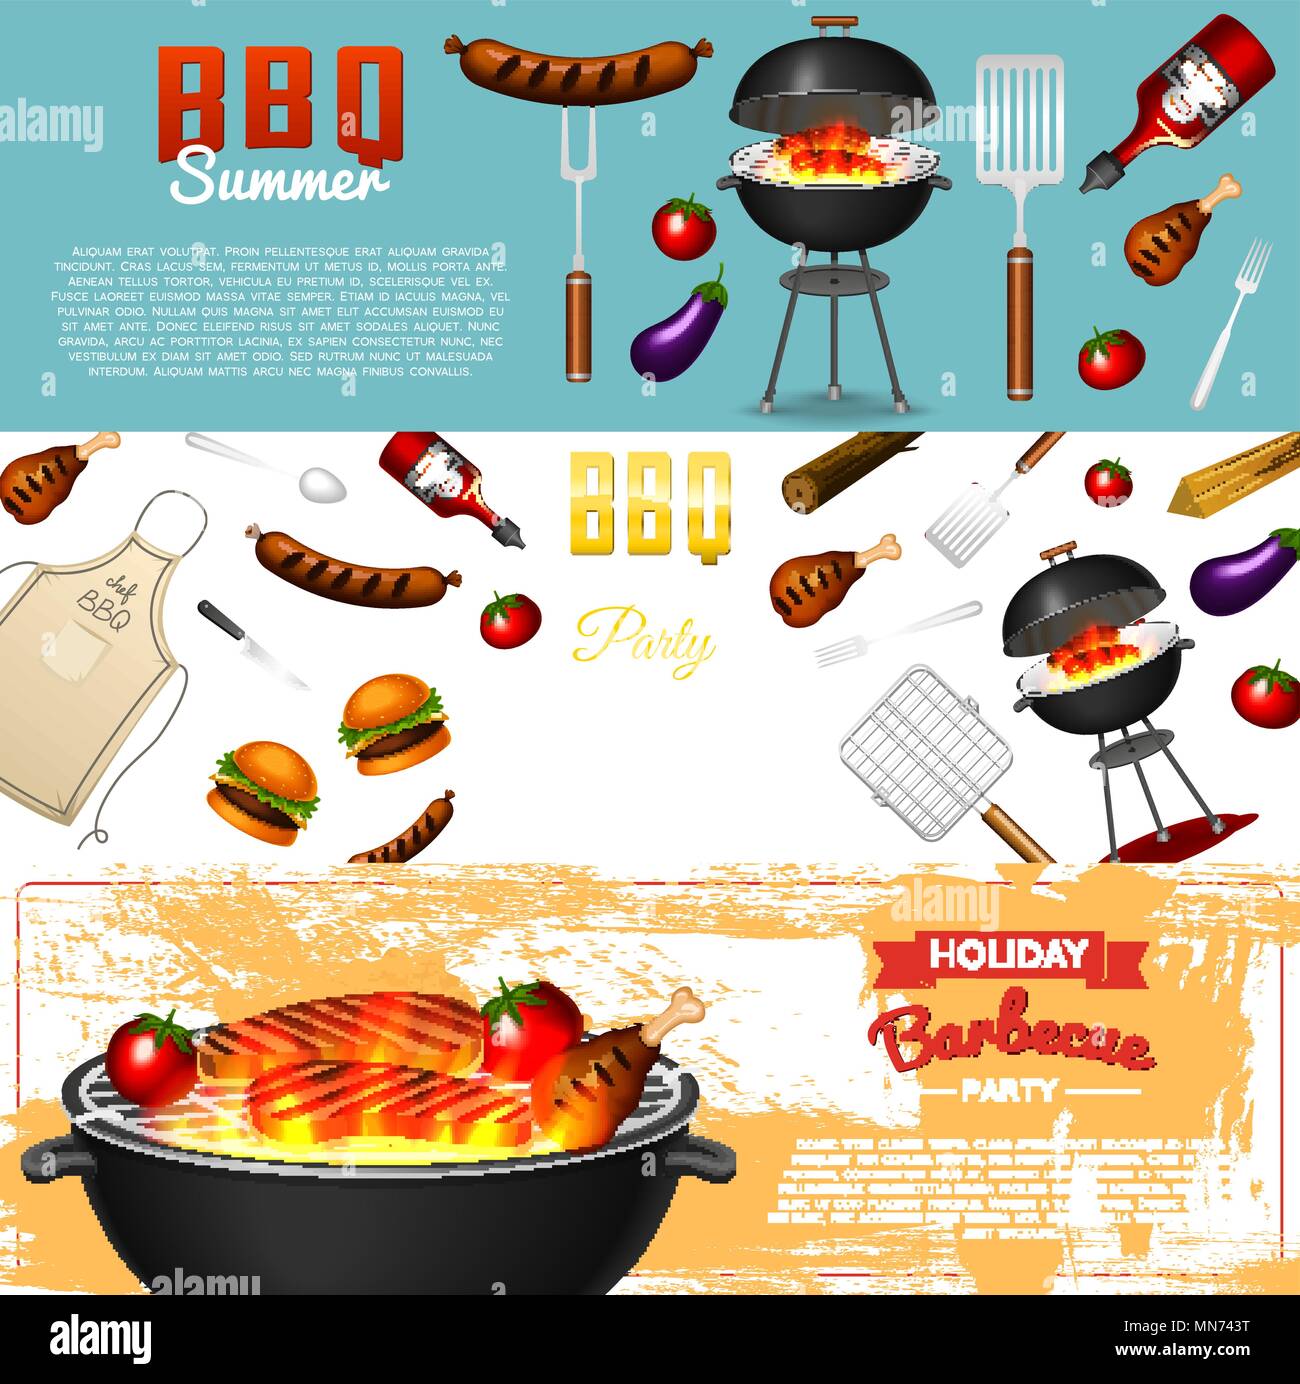 Barbecue grill elements set isolated on red background. BBQ party poster.  Summer time. Meat restaurant at